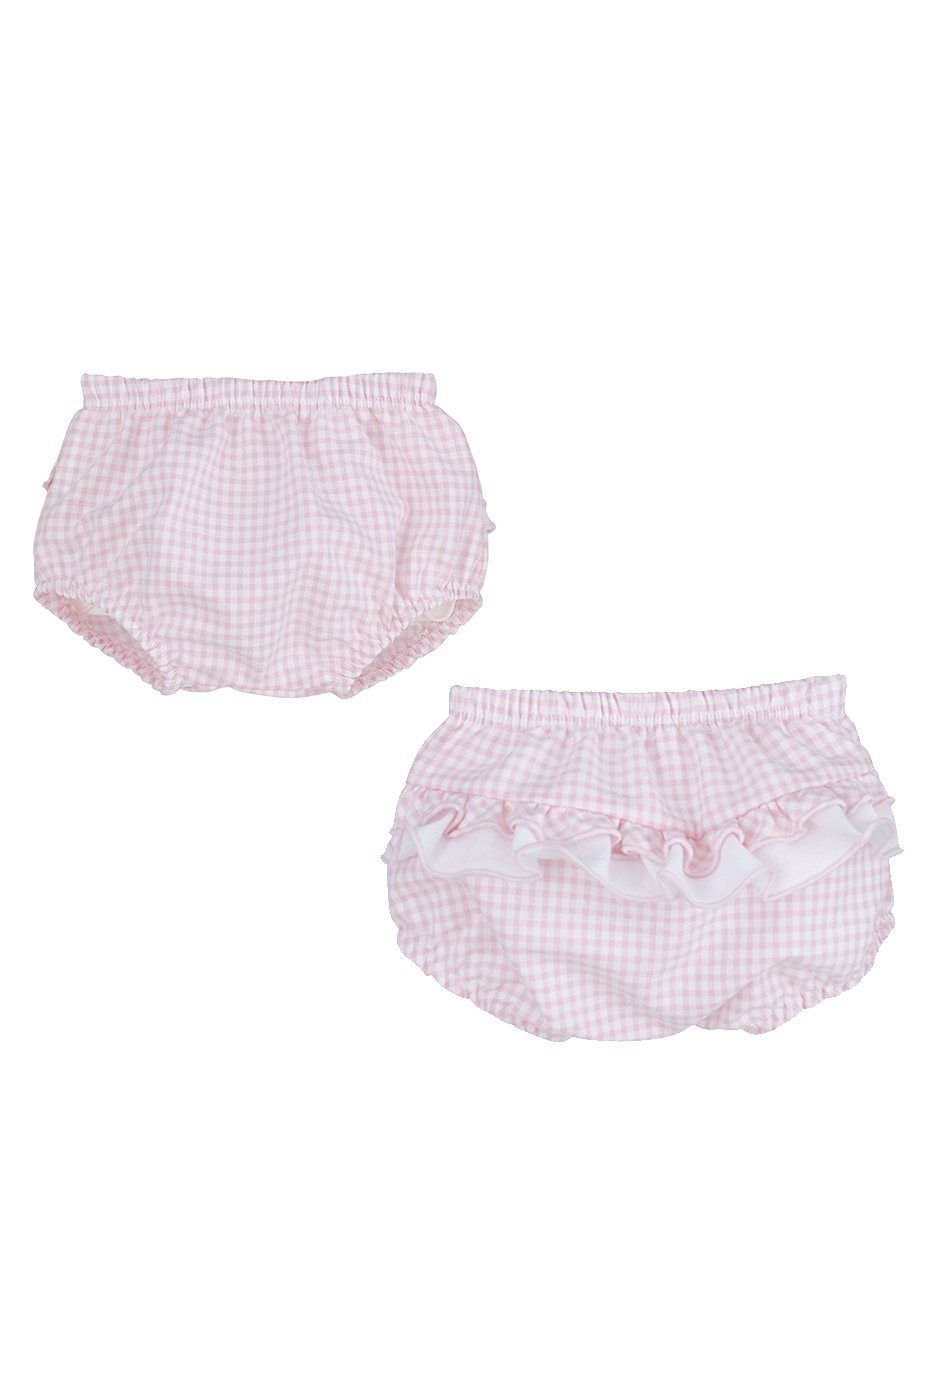 Calamaro "Dorothy" Pink Gingham Bloomers | Millie and John